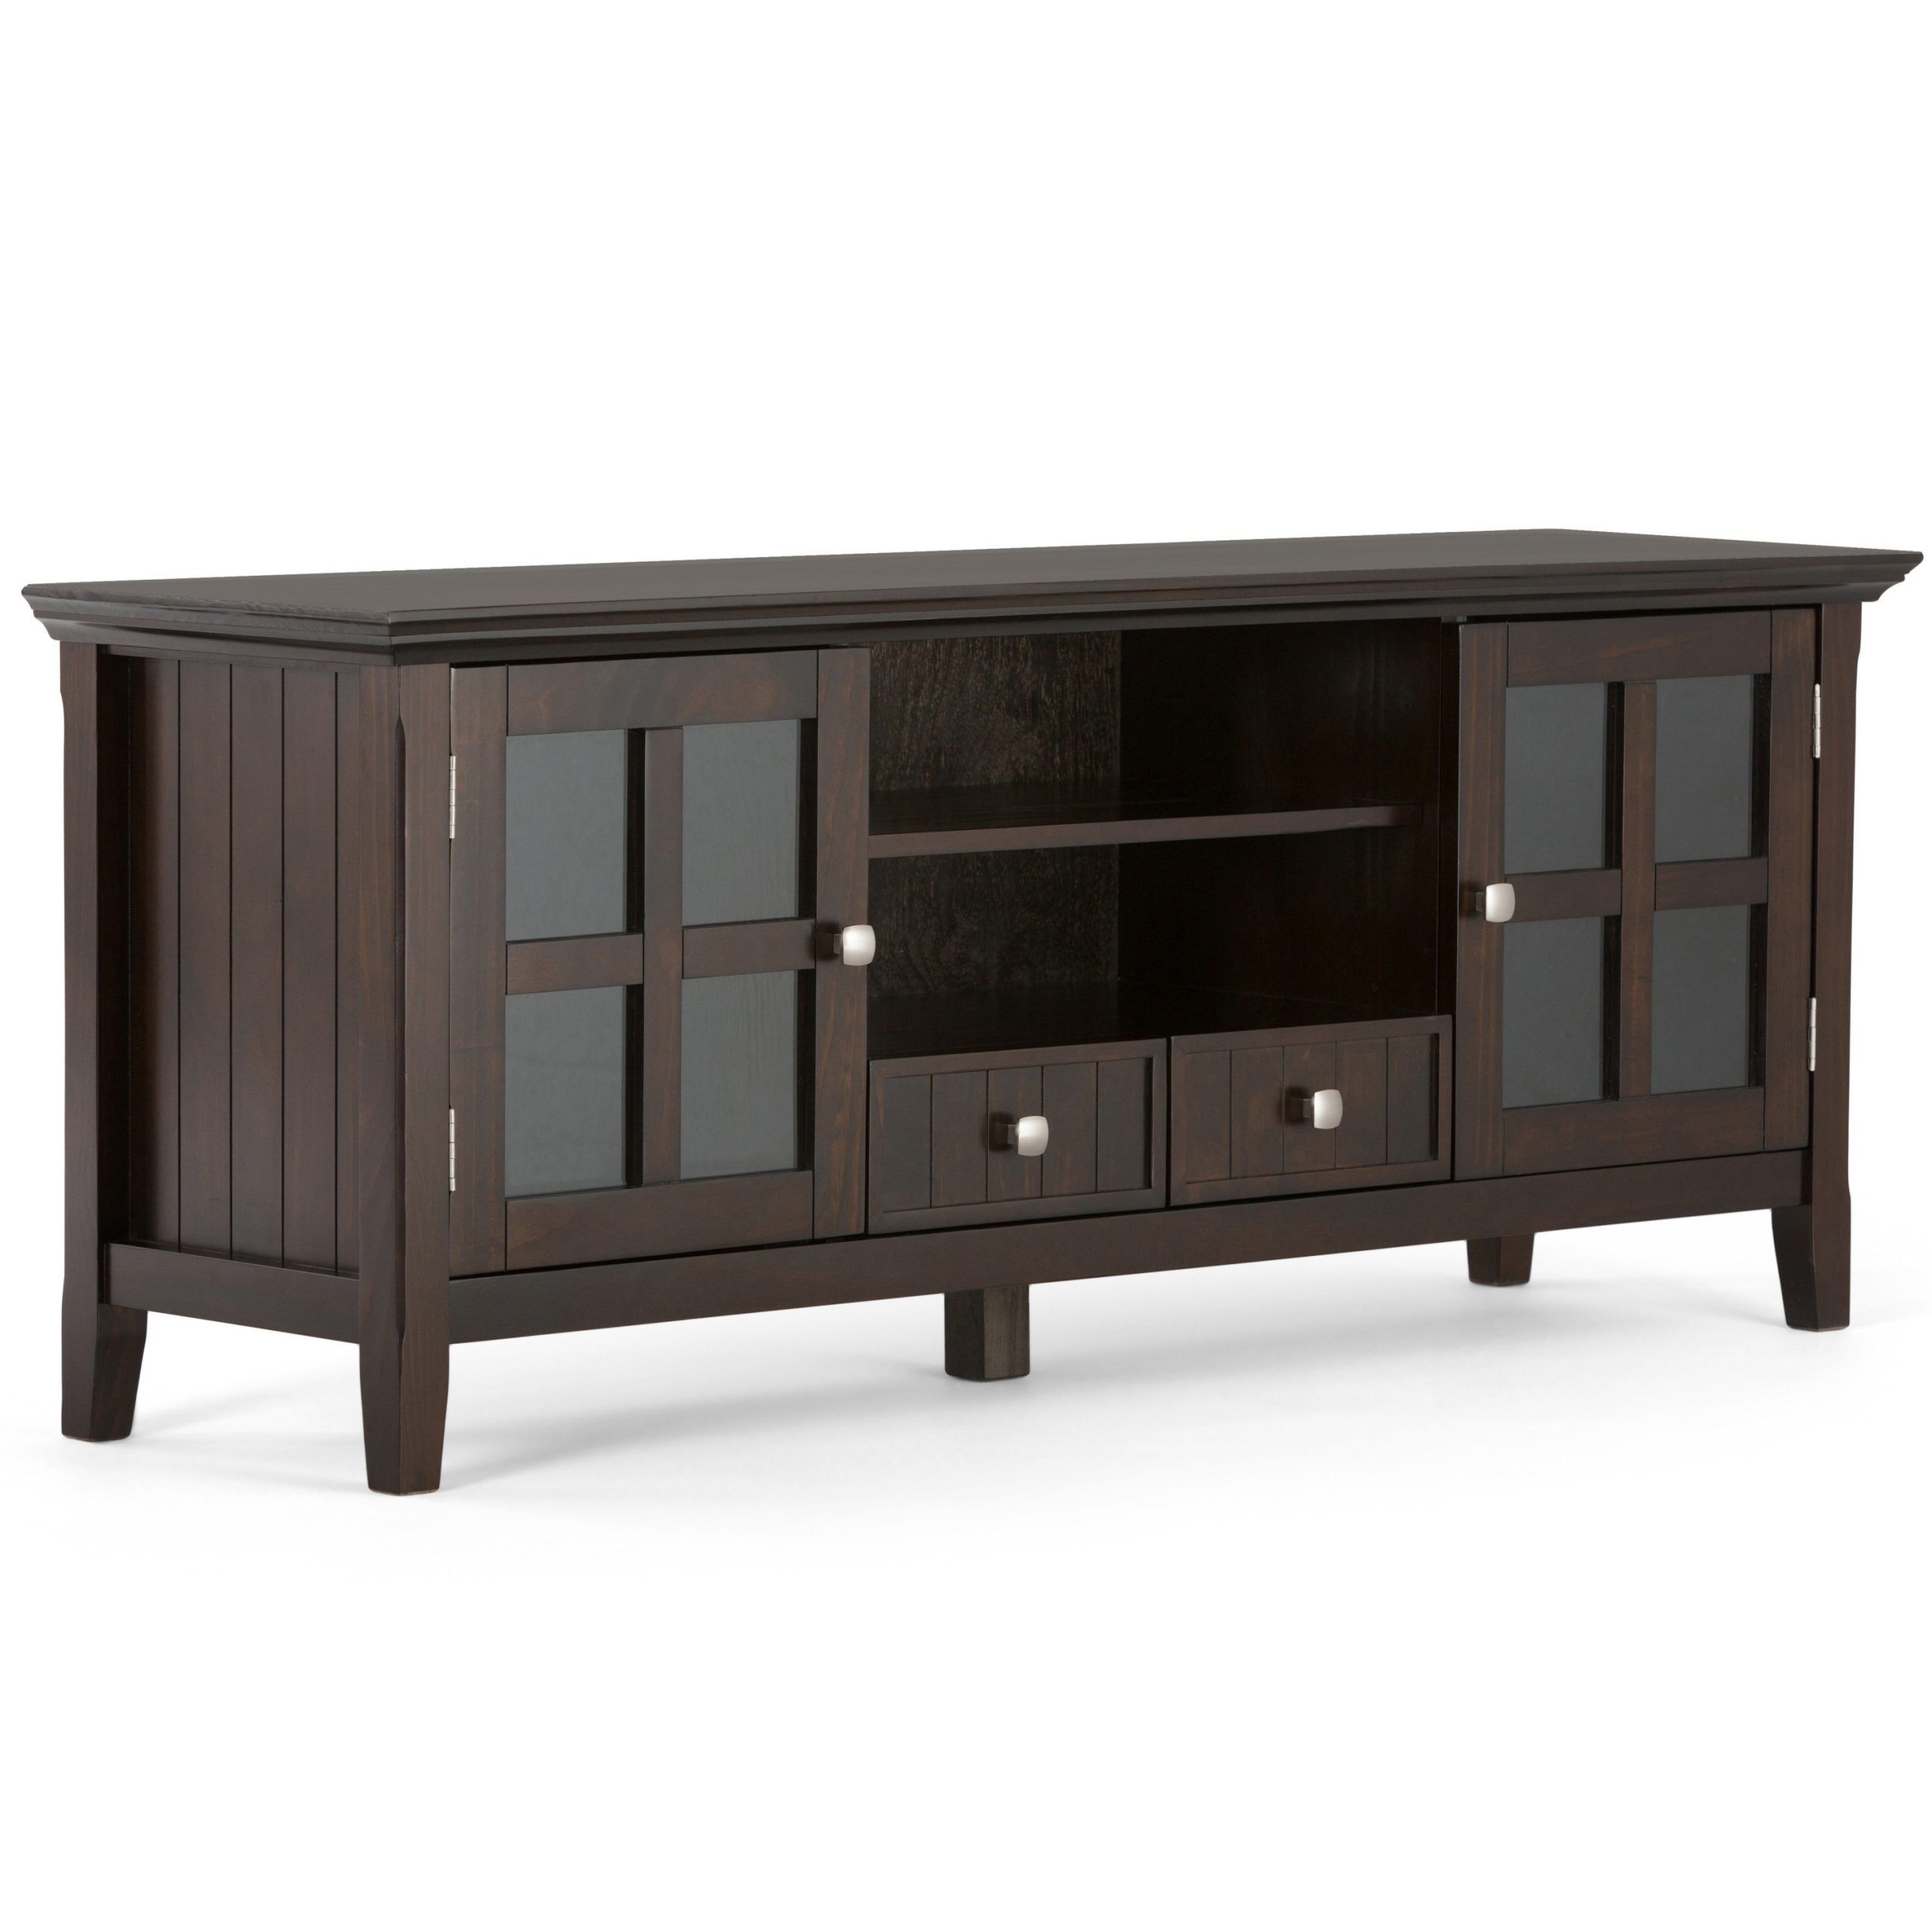 Brooklyn + Max Brunswick Solid Wood 60 Inch Wide Rustic Tv Inside Bromley Extra Wide Oak Tv Stands (View 4 of 20)